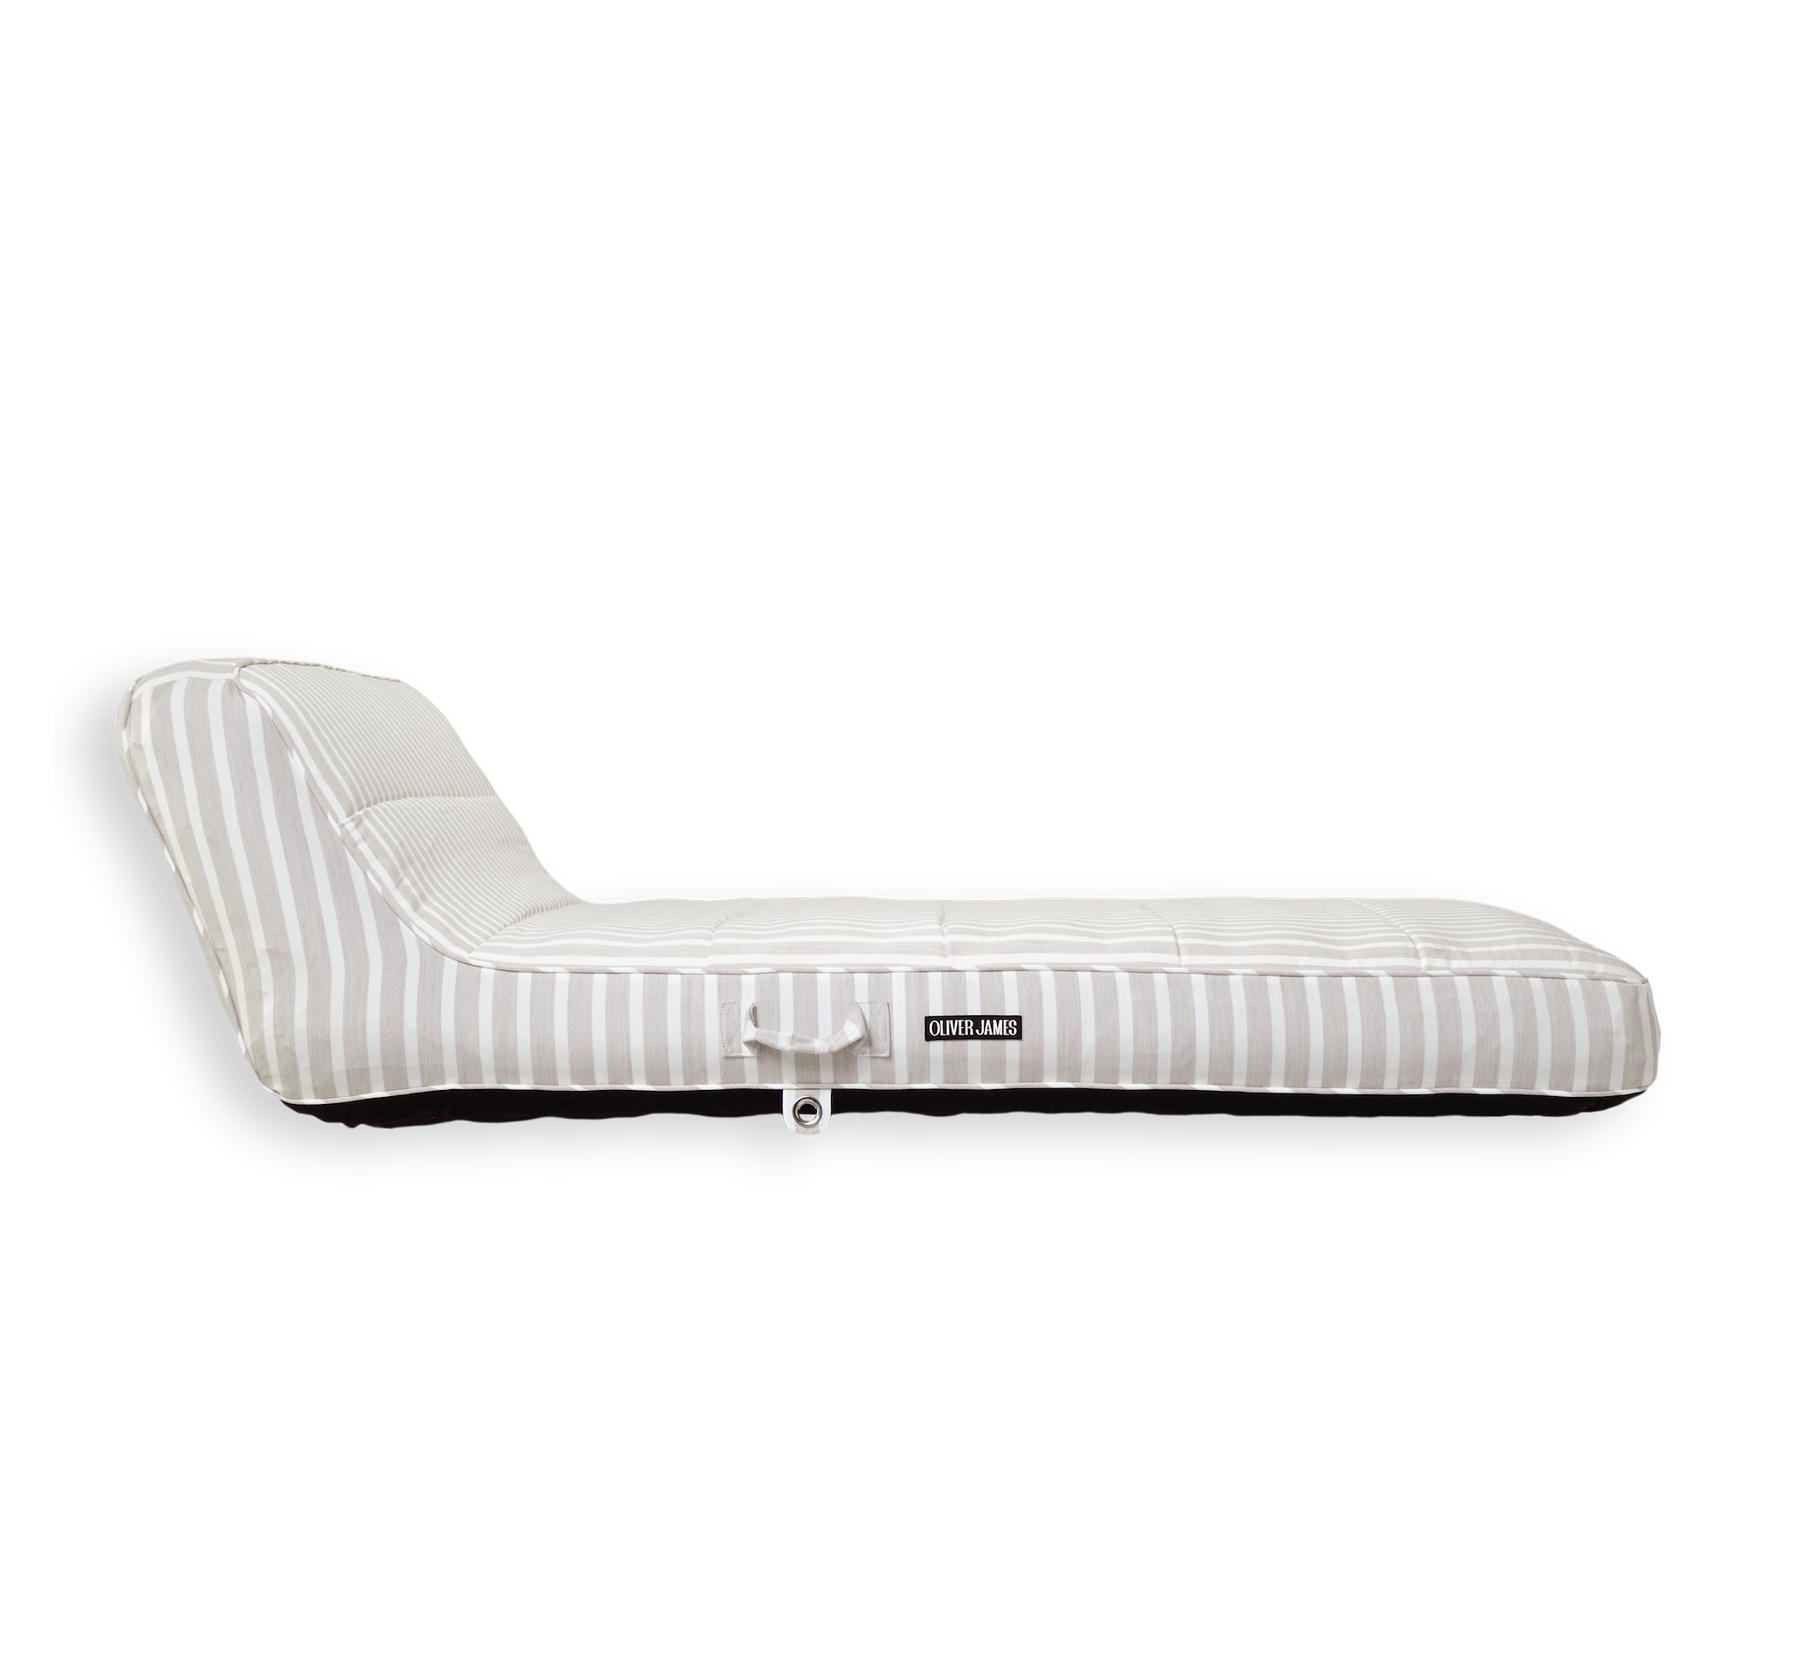 The side profile and backrest angle of a double beige and white stripe luxury pool float.